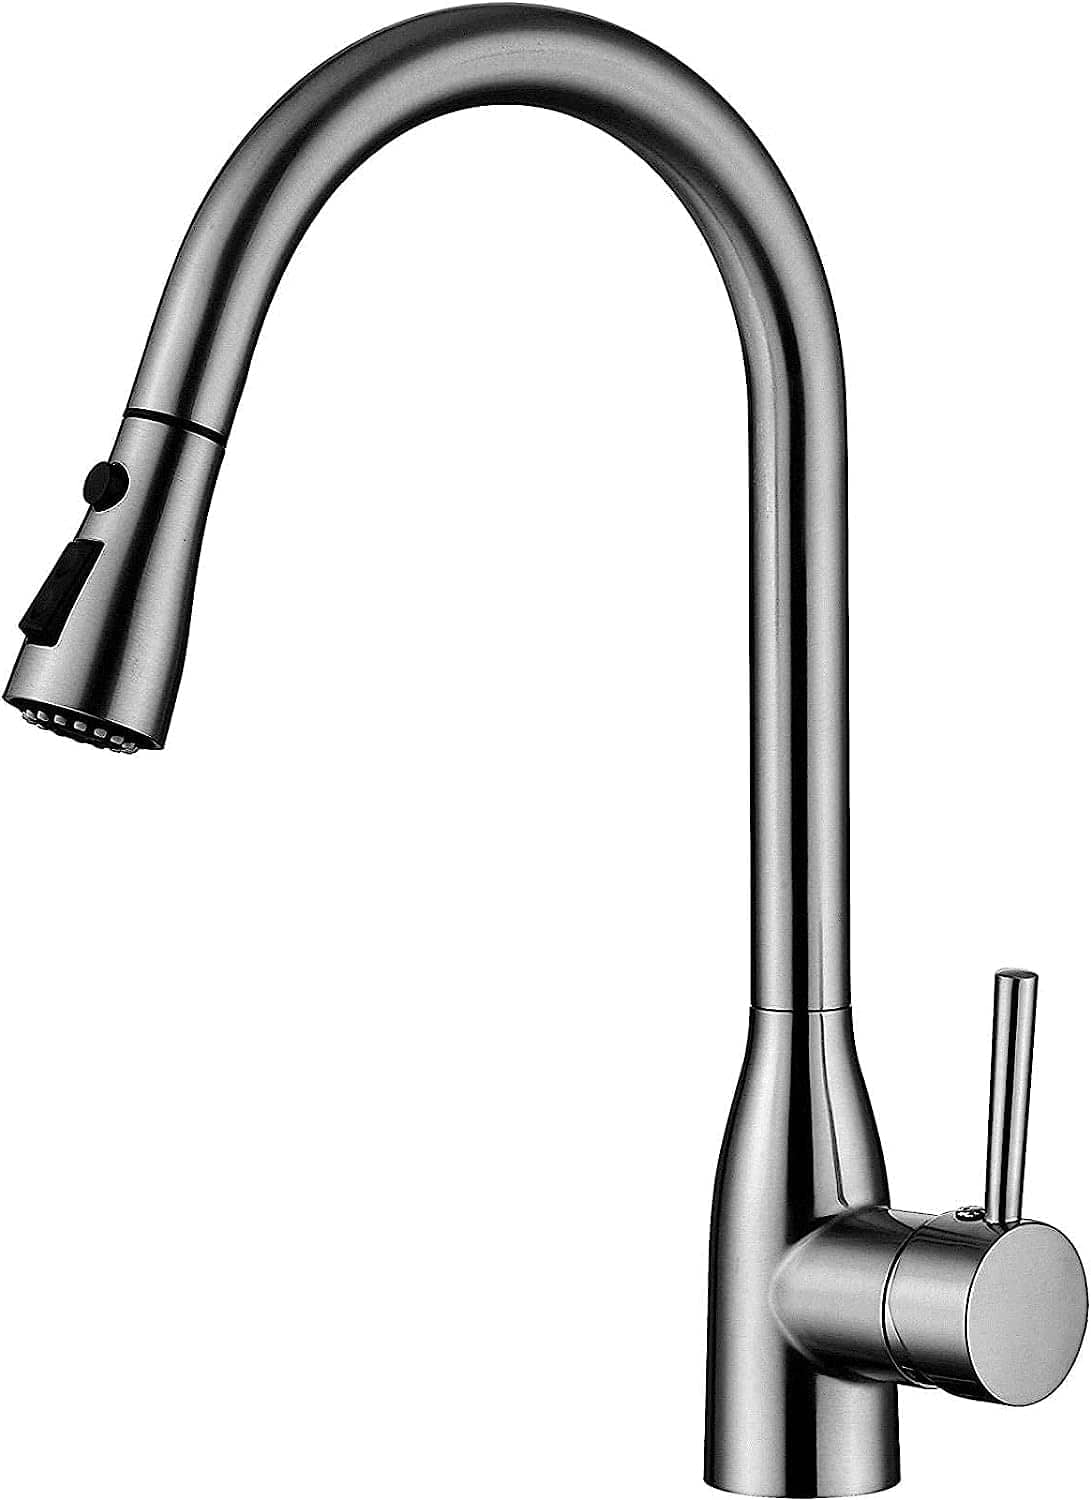 Buy Stainless Steel Kitchen Sink Faucet - SK30-400 & SK30-400BL | Shop at Supply Master Accra, Ghana Kitchen Tap Buy Tools hardware Building materials